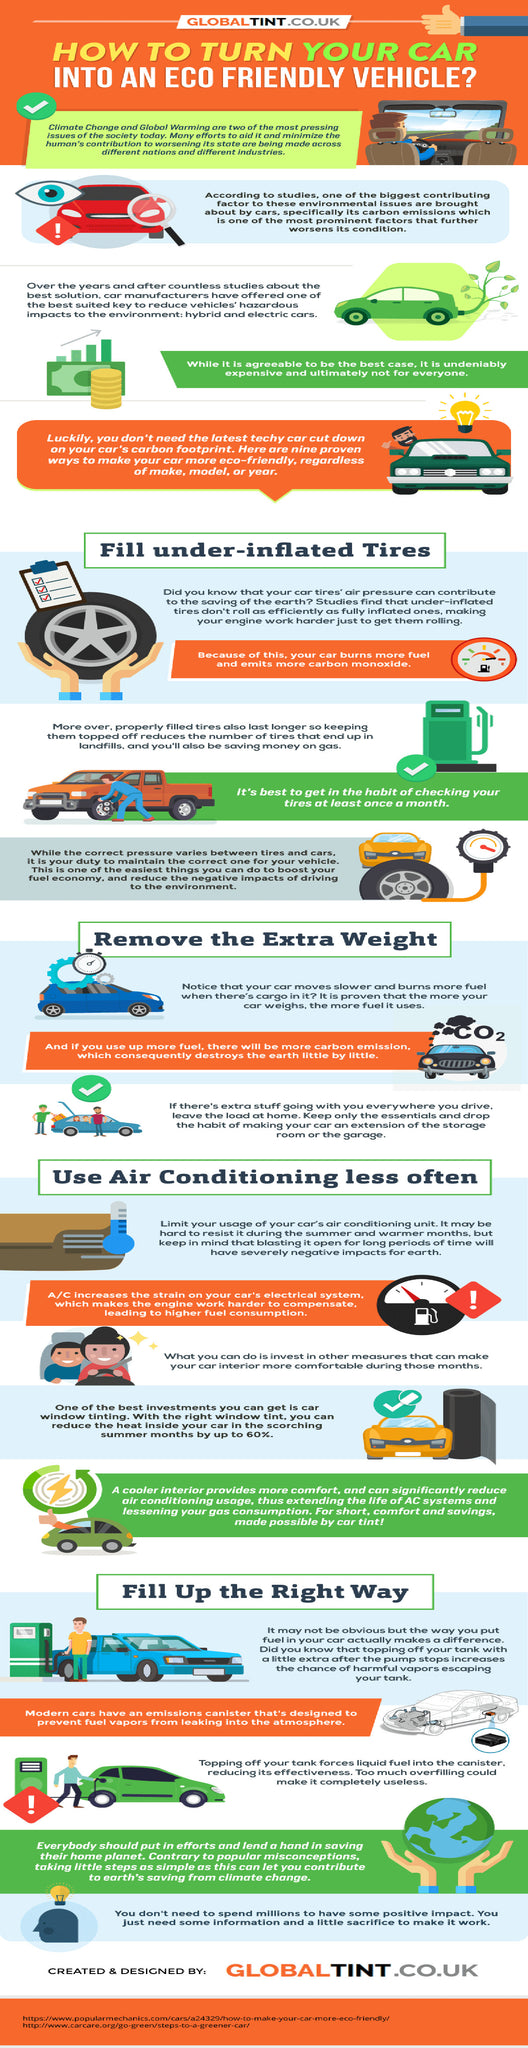 green-your-car-fight-climate-change-infographic